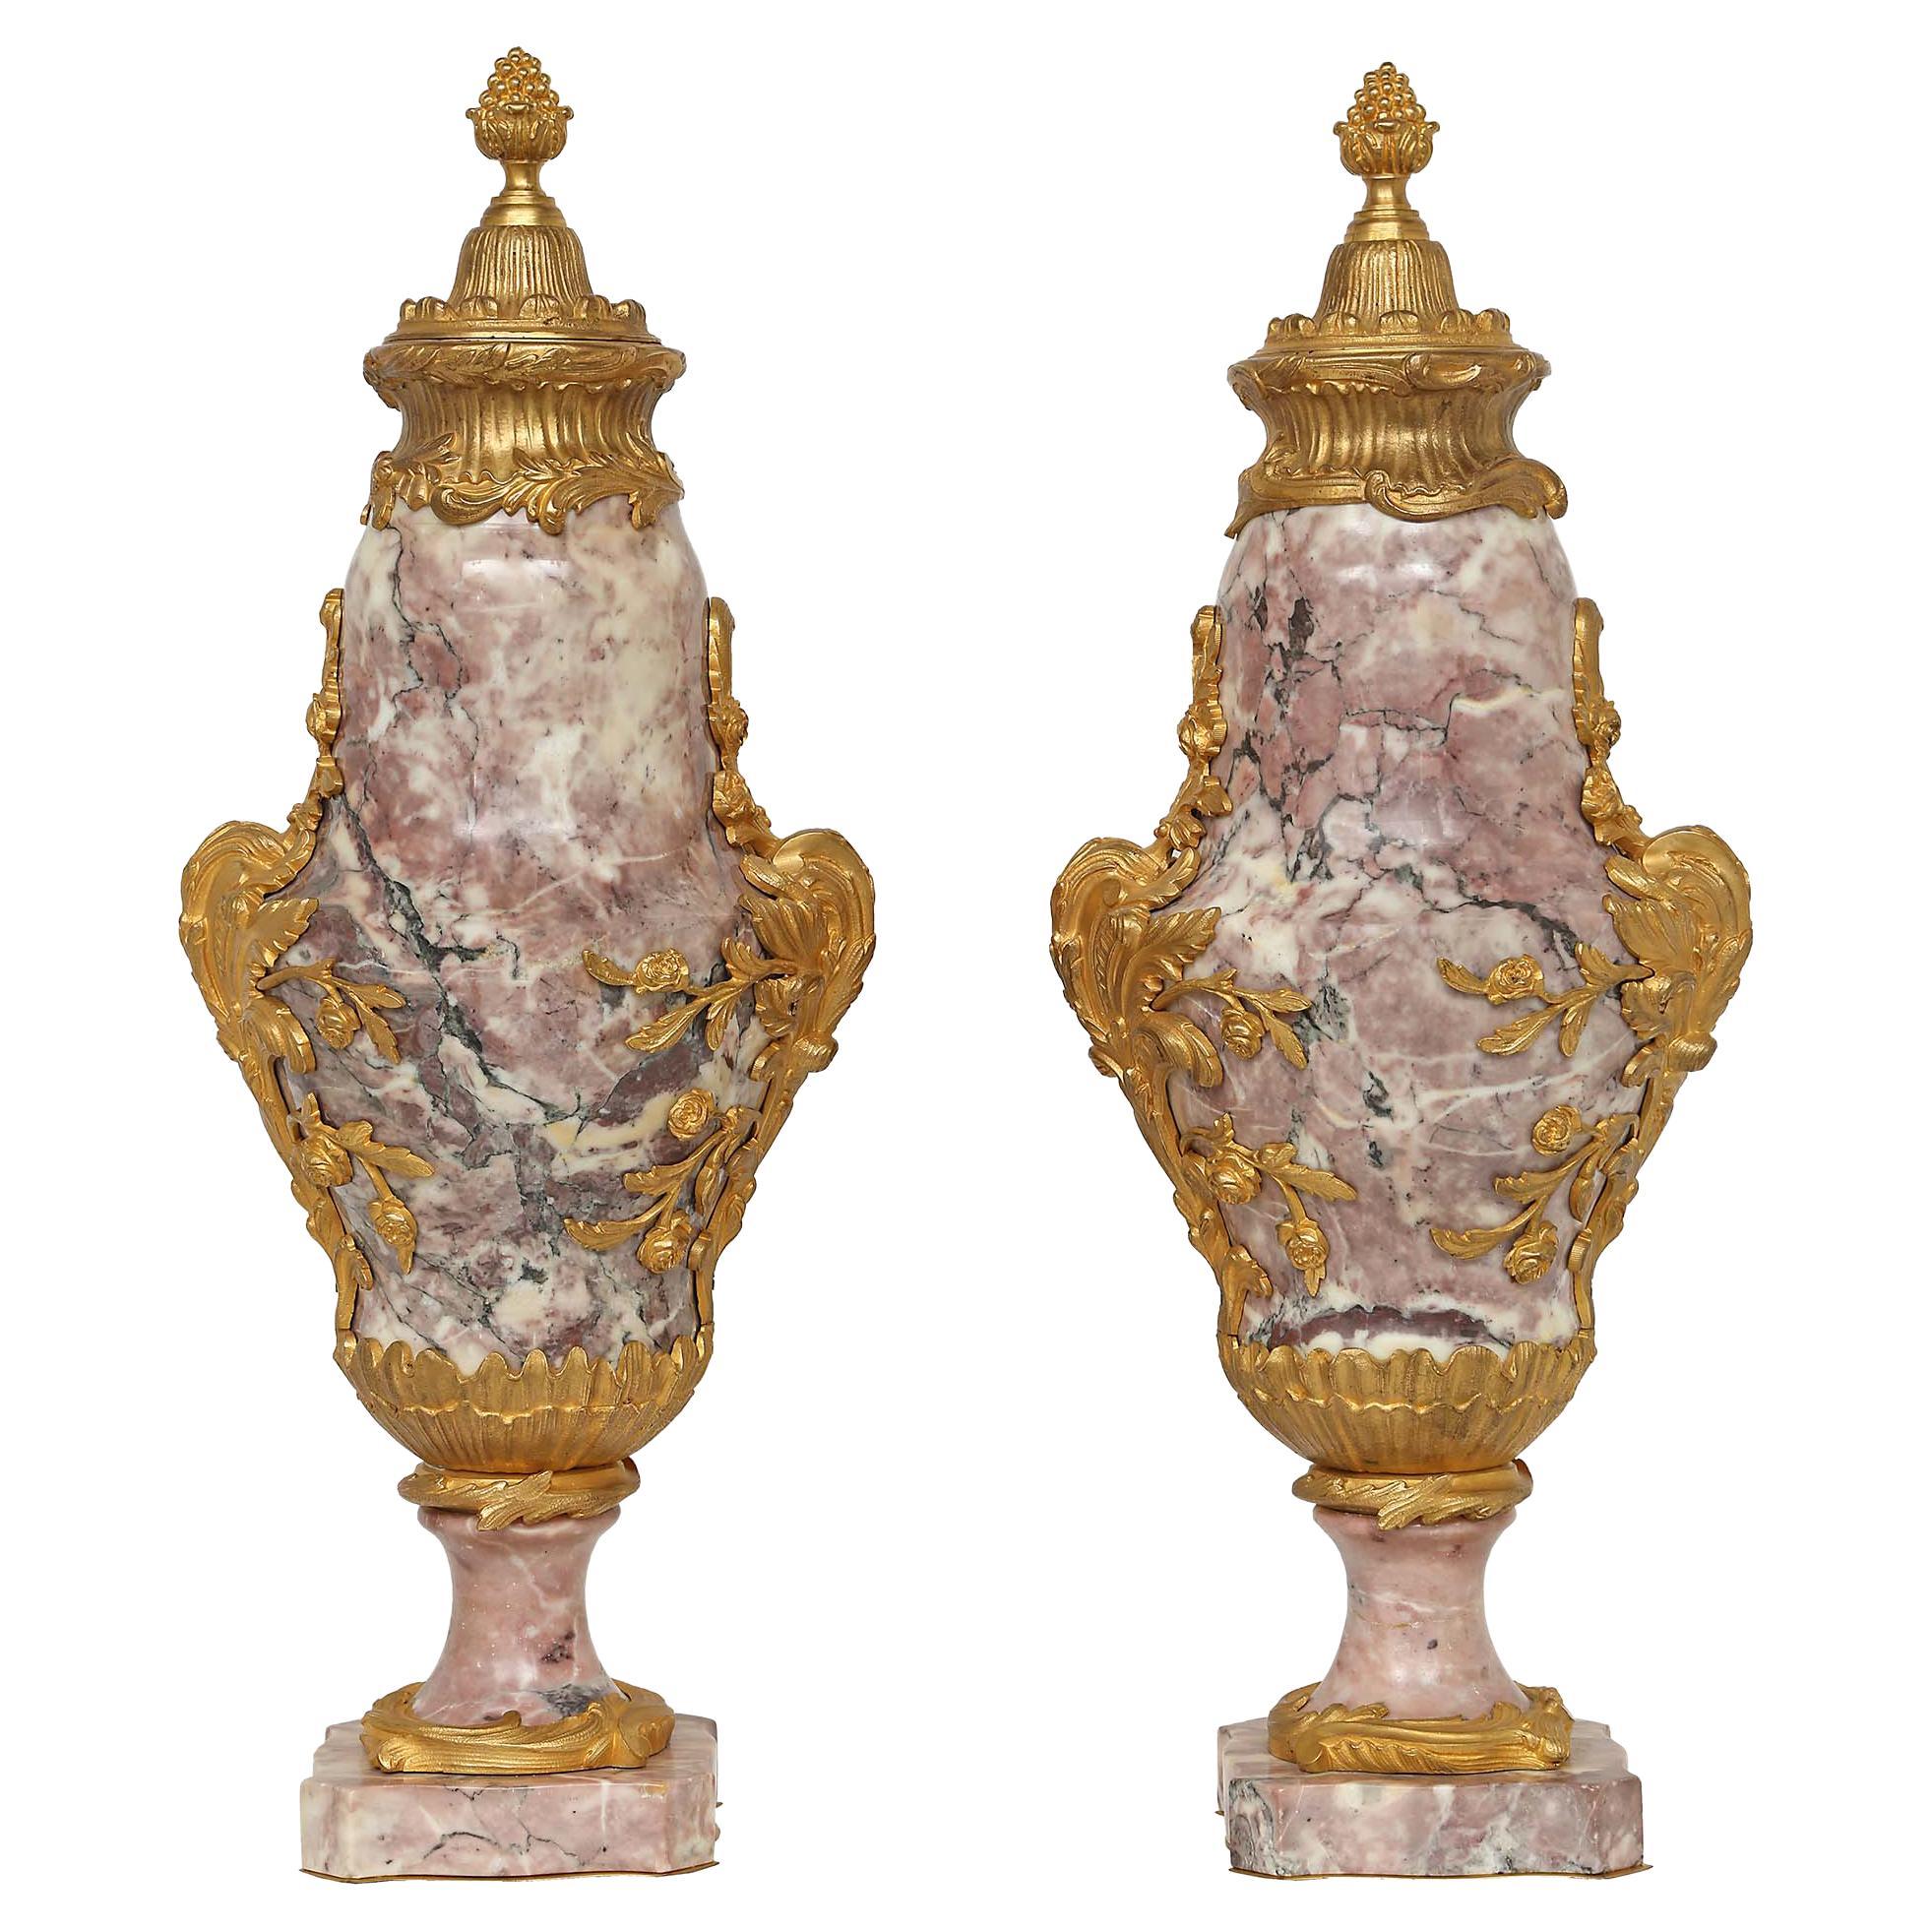 French Louis XV Style Mid-19th Century Ormolu and Marble Cassolettes